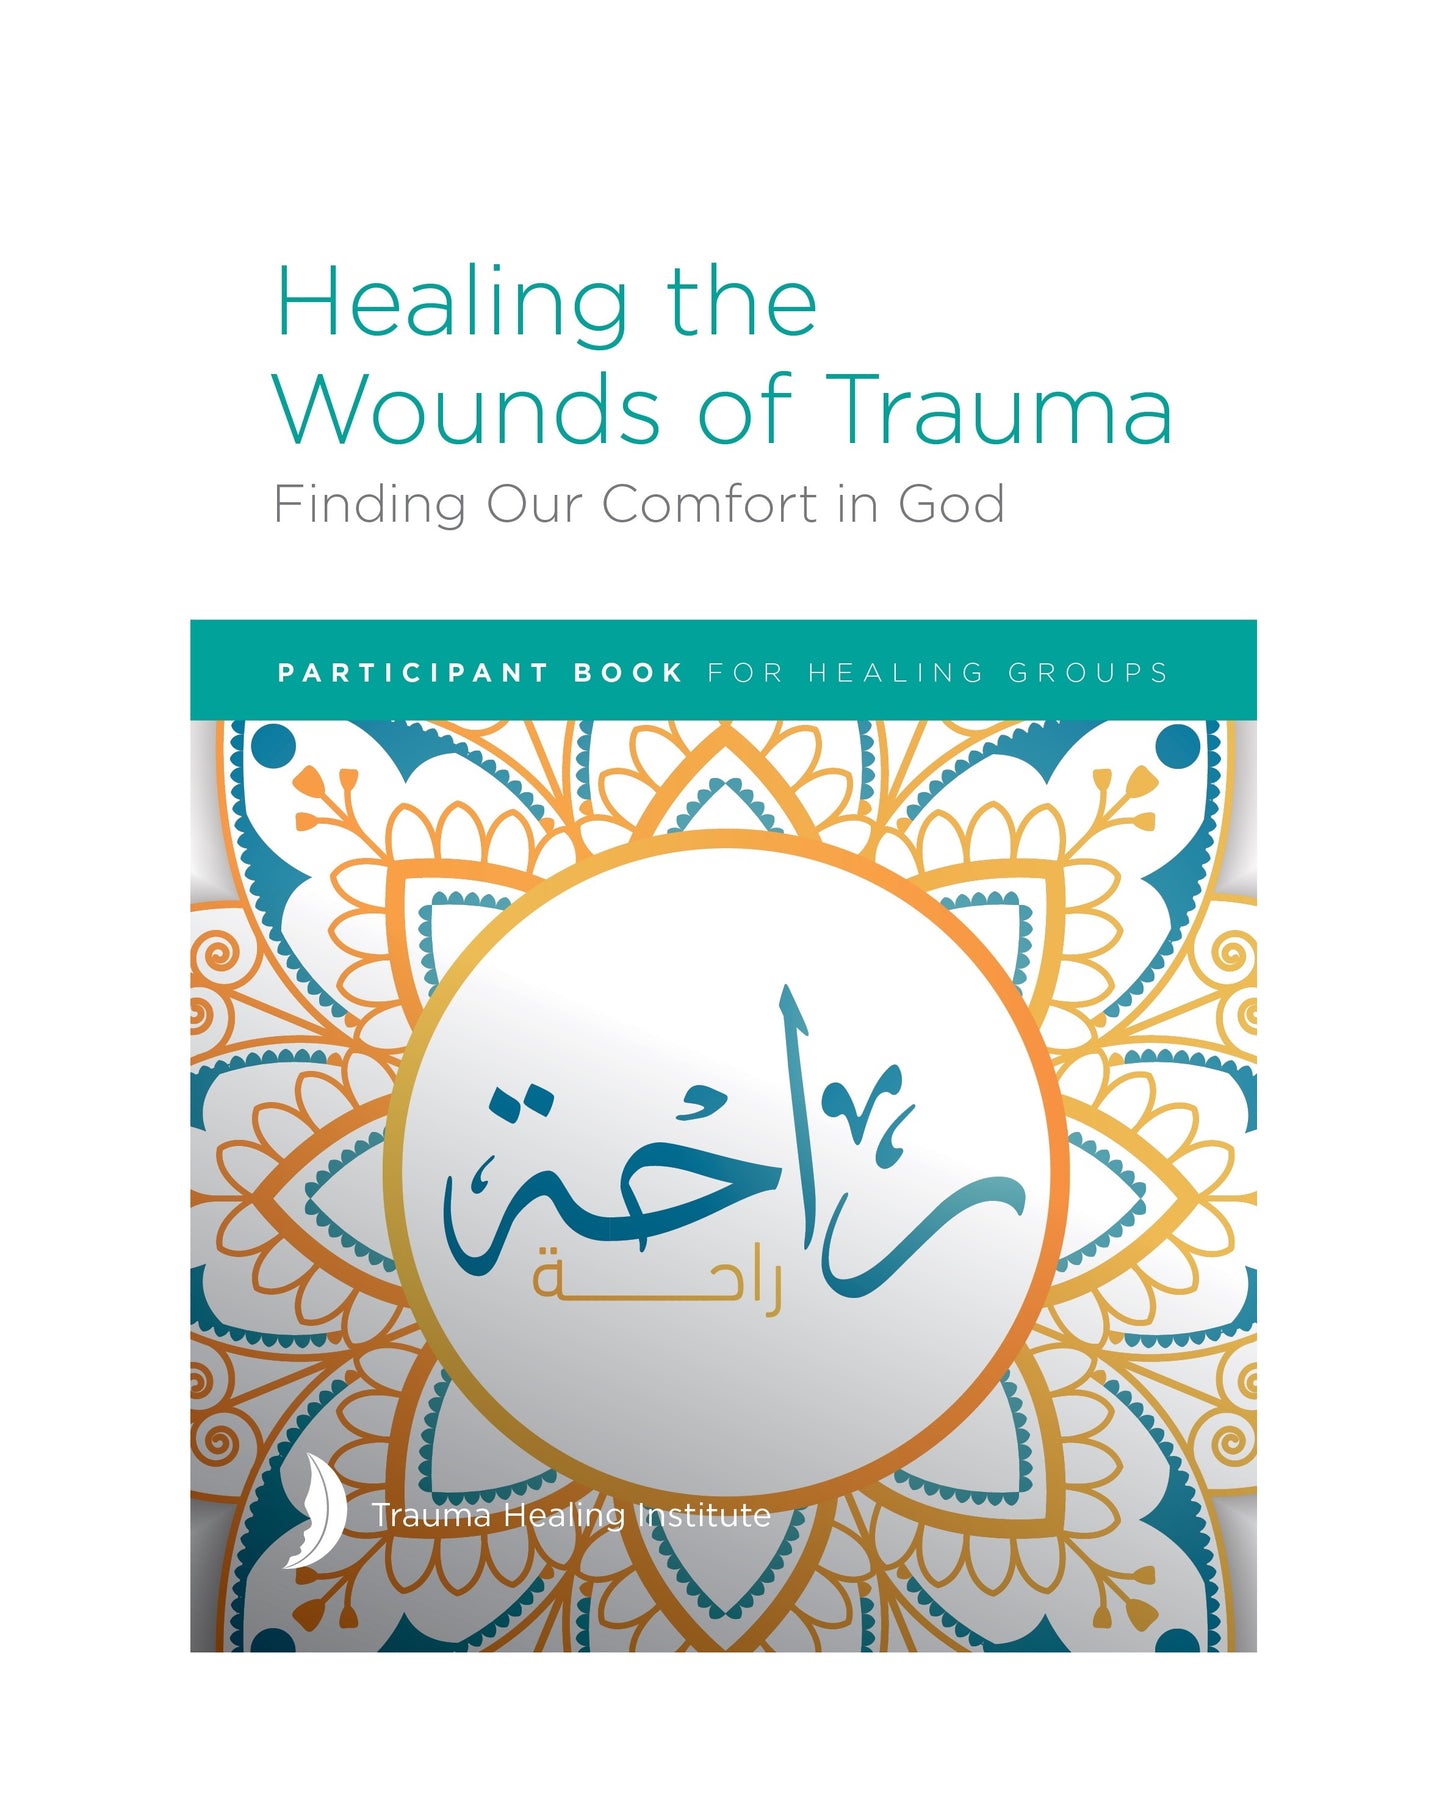 Healing the Wounds of Trauma: Finding Our Comfort in God Participant Book - Print on Demand